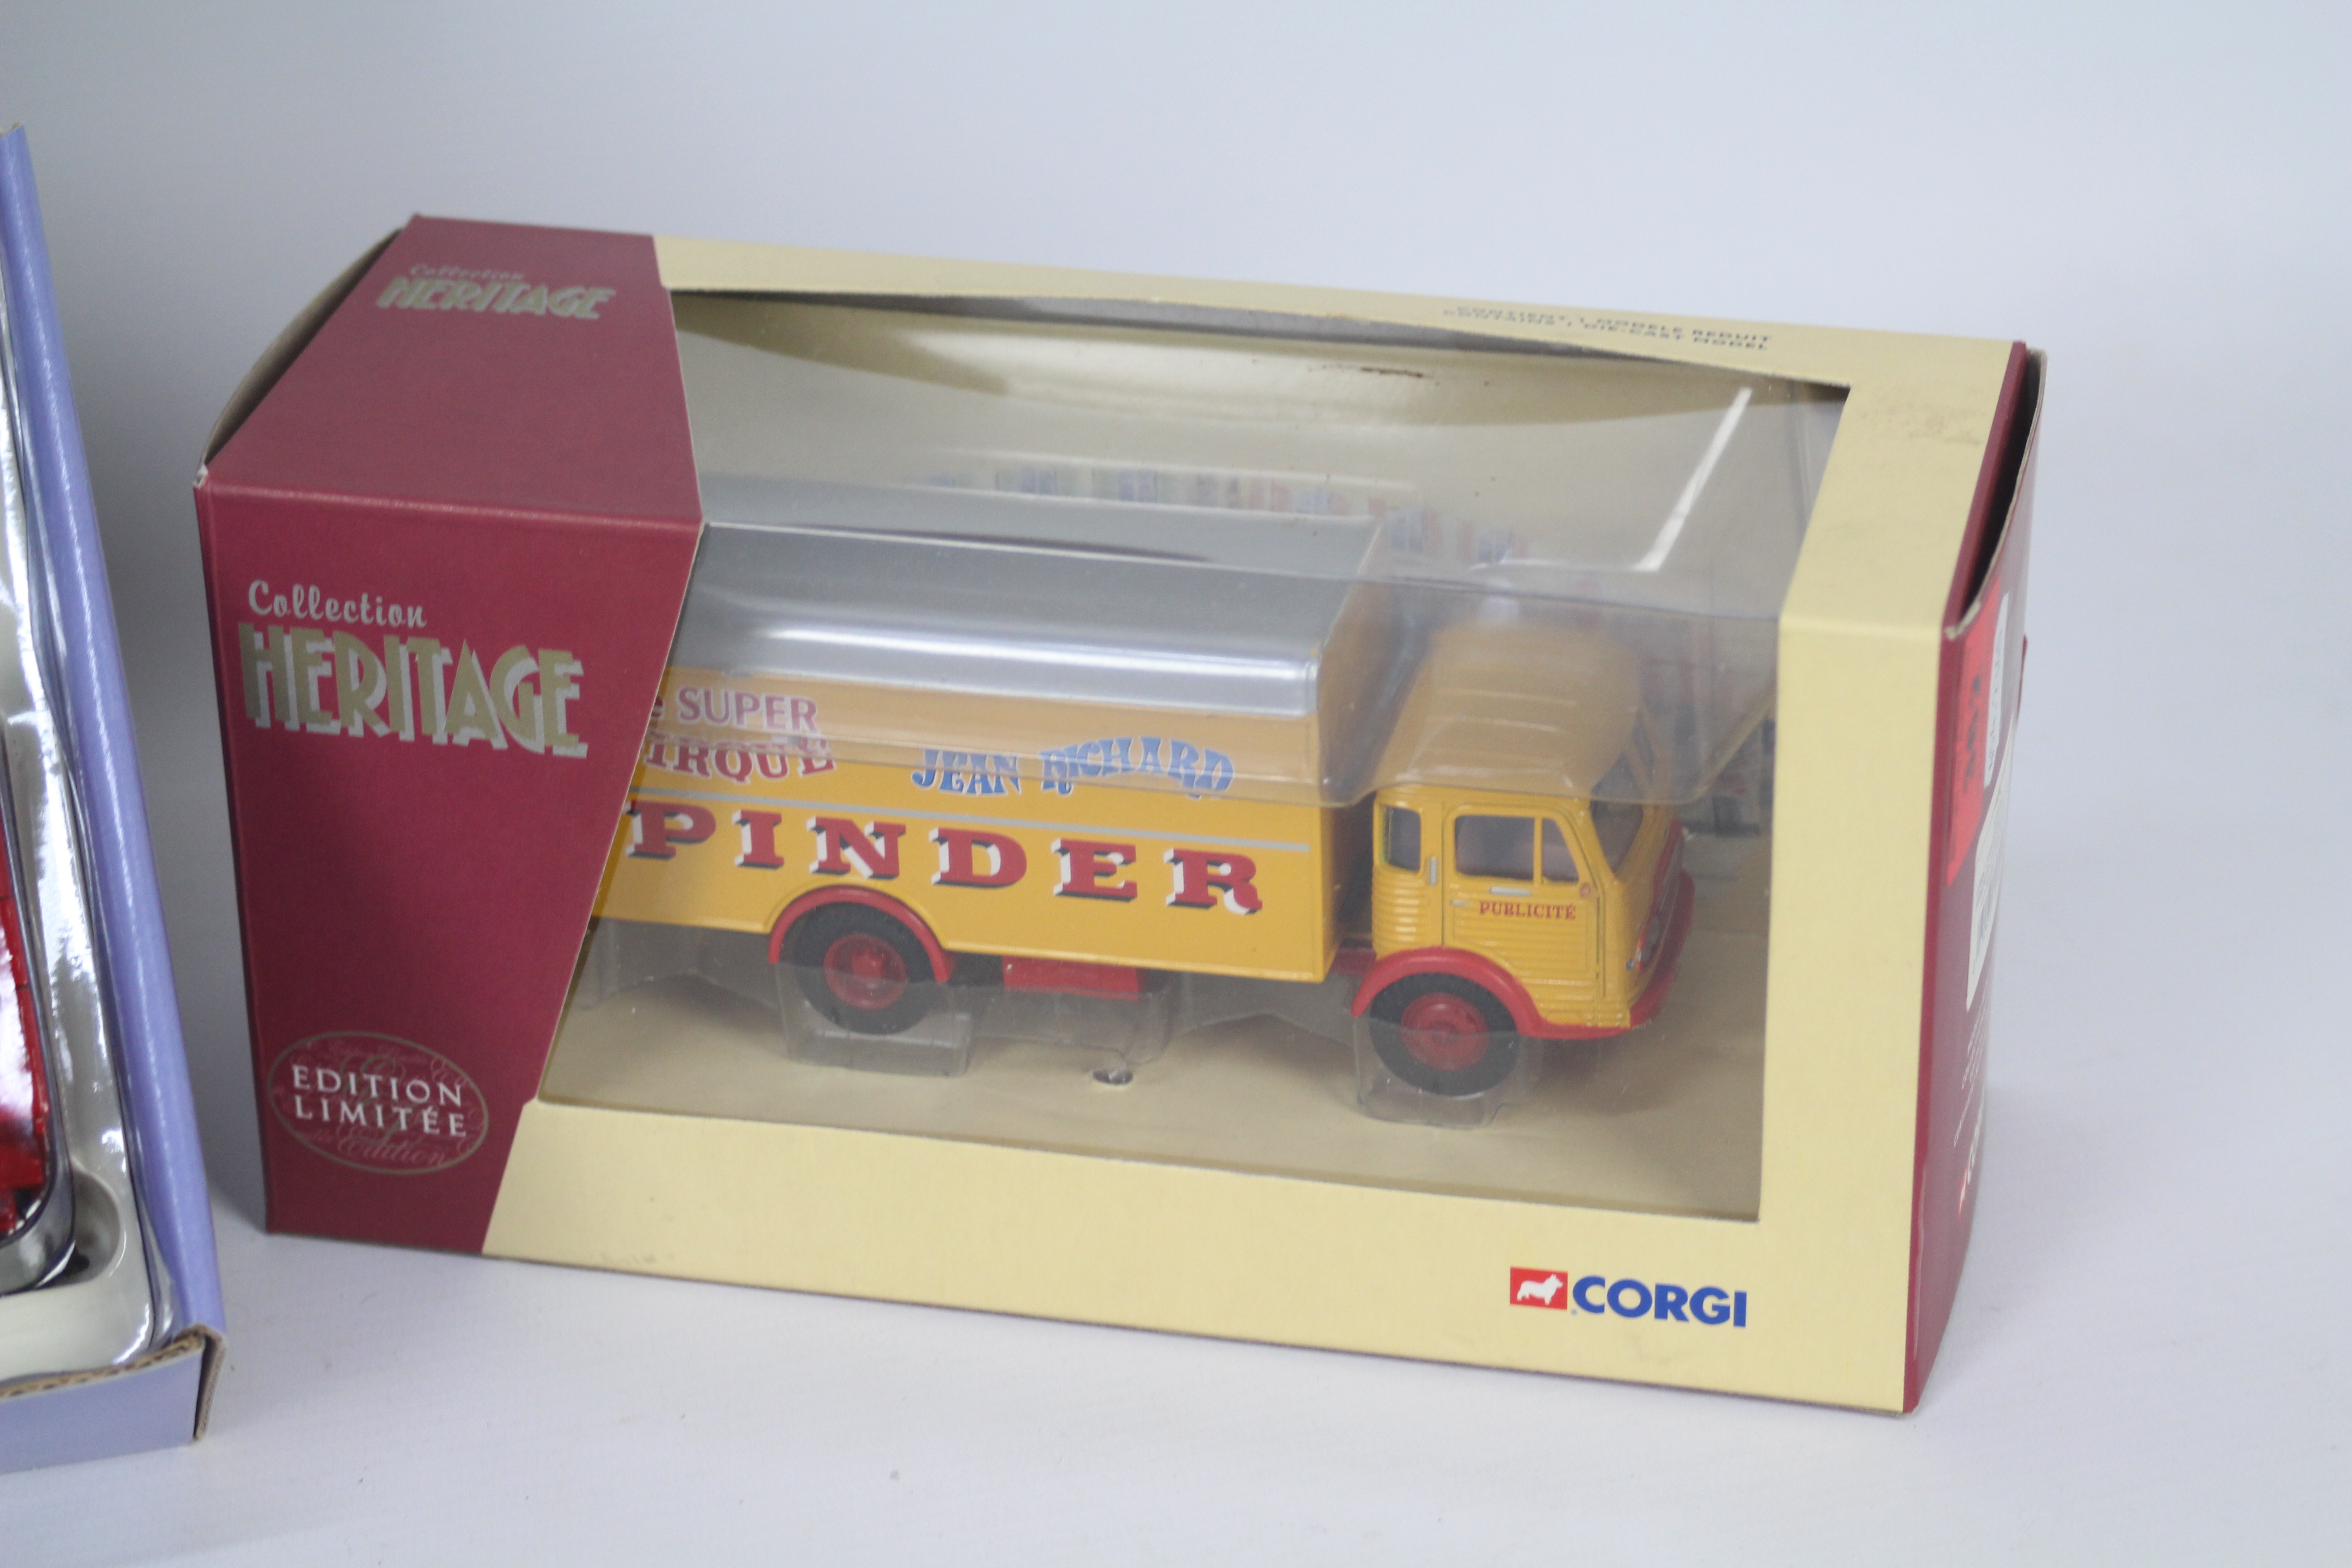 Corgi - a Corgi Limited Edition Heritage Collection Jean Richard Pinder diecast model #72802 and a - Image 3 of 3